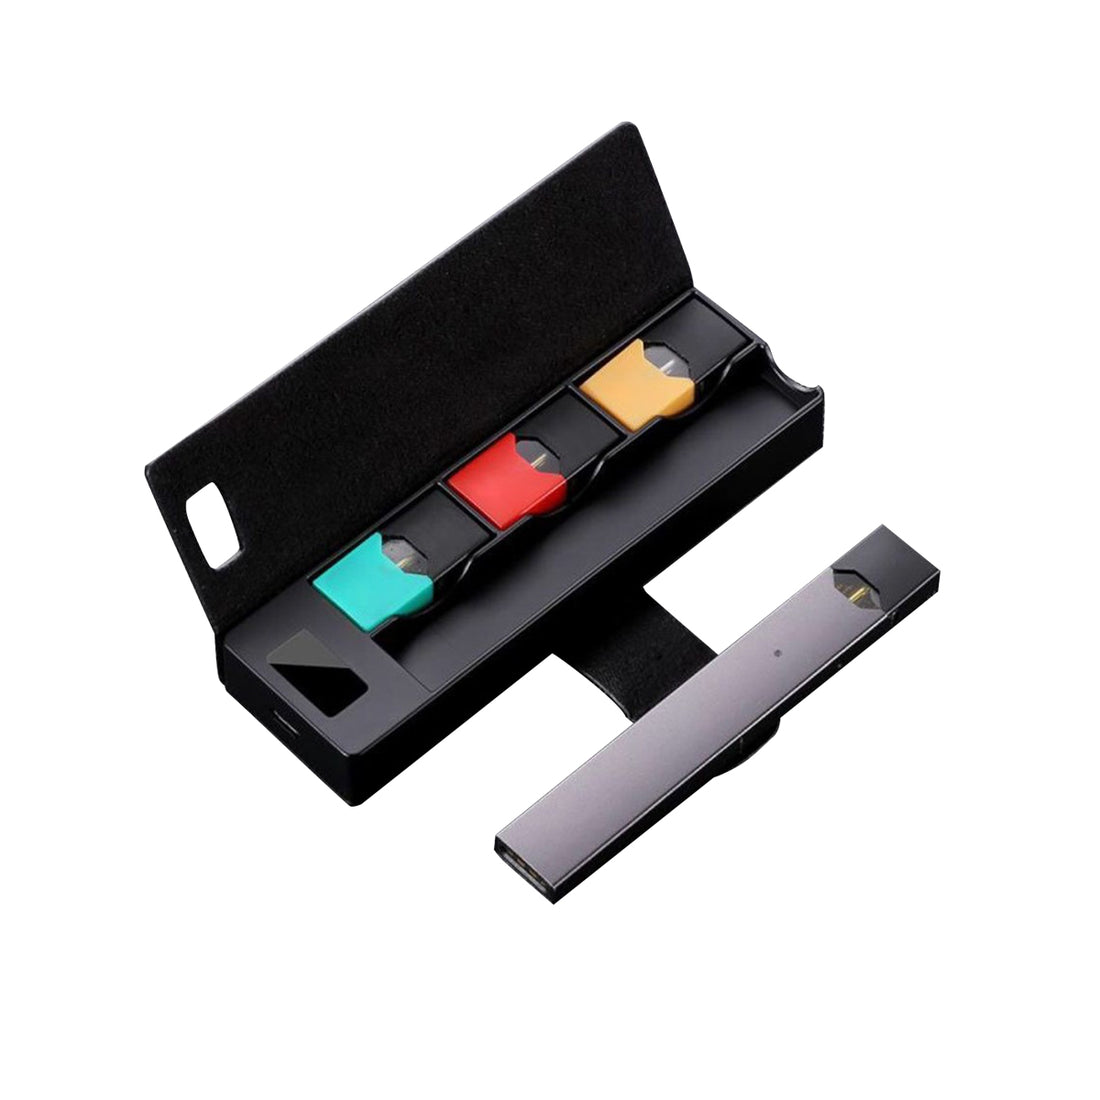 JUUL Compatible Charging Case with LCD indicator holds 3 pods 1200 mAh Portable Wireless